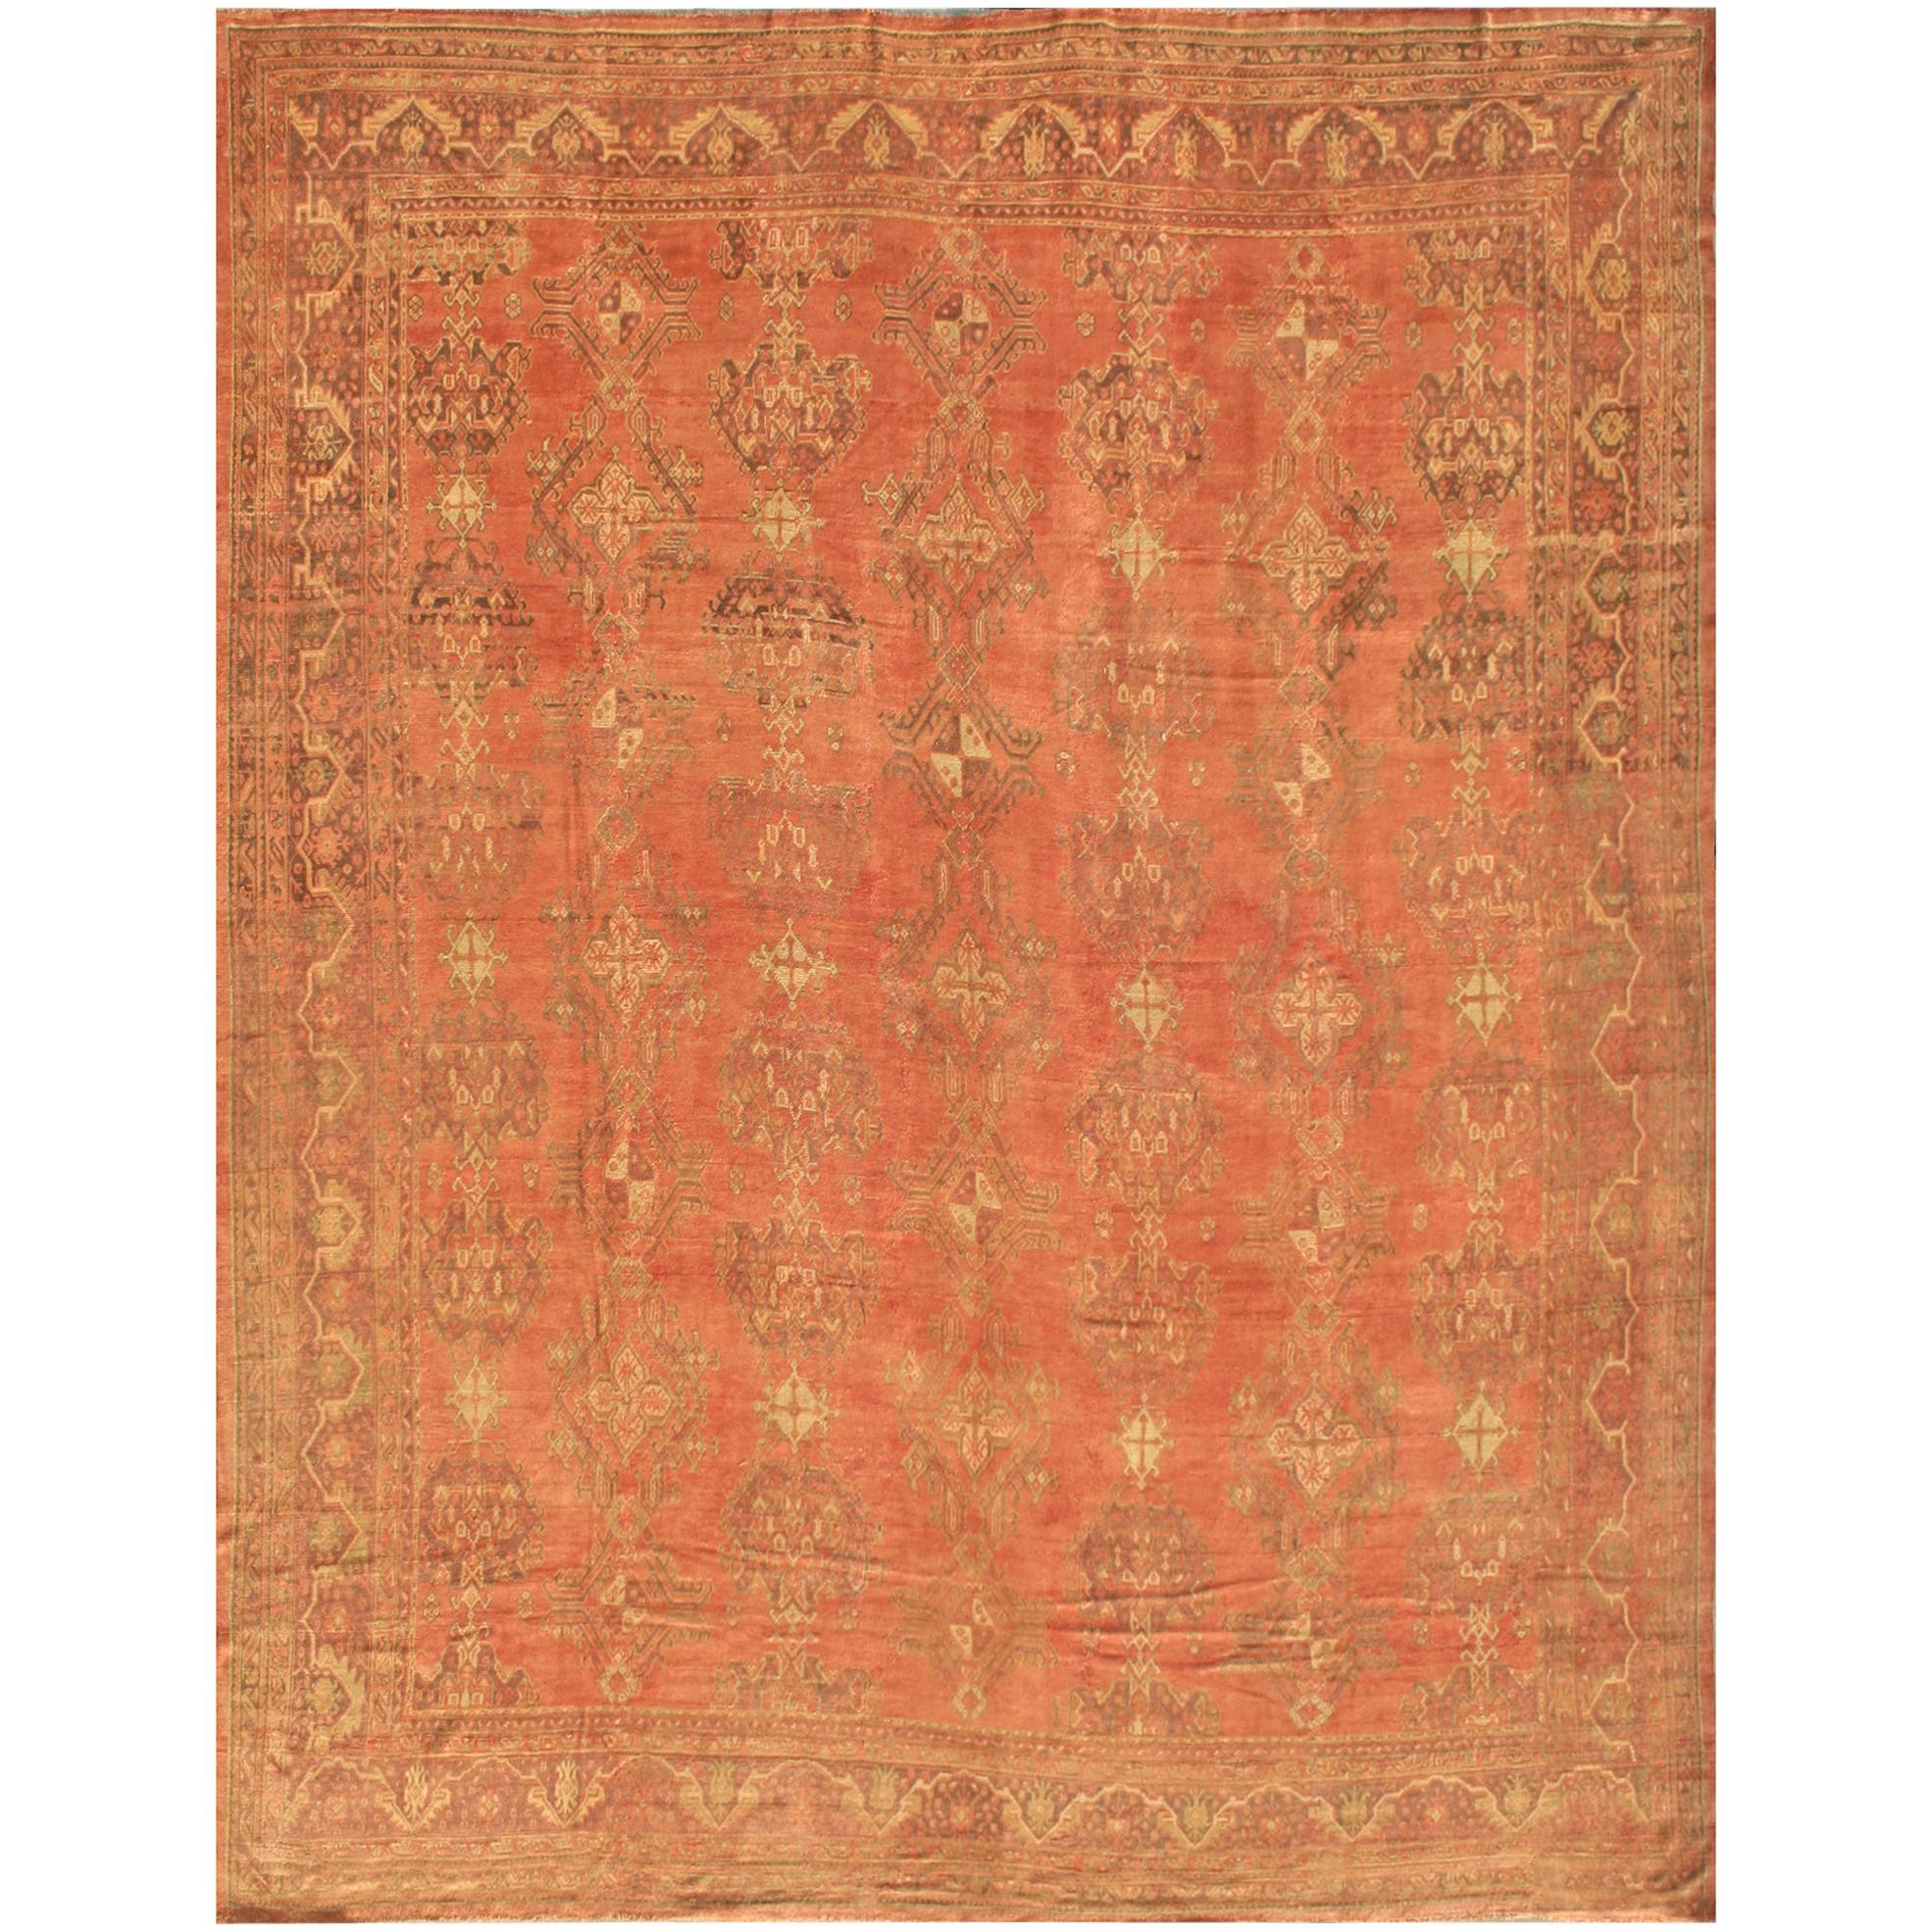 Early 20th Century Turkish Oushak Carpet ( 17' x 19'8" - 218 x 600 ) For Sale